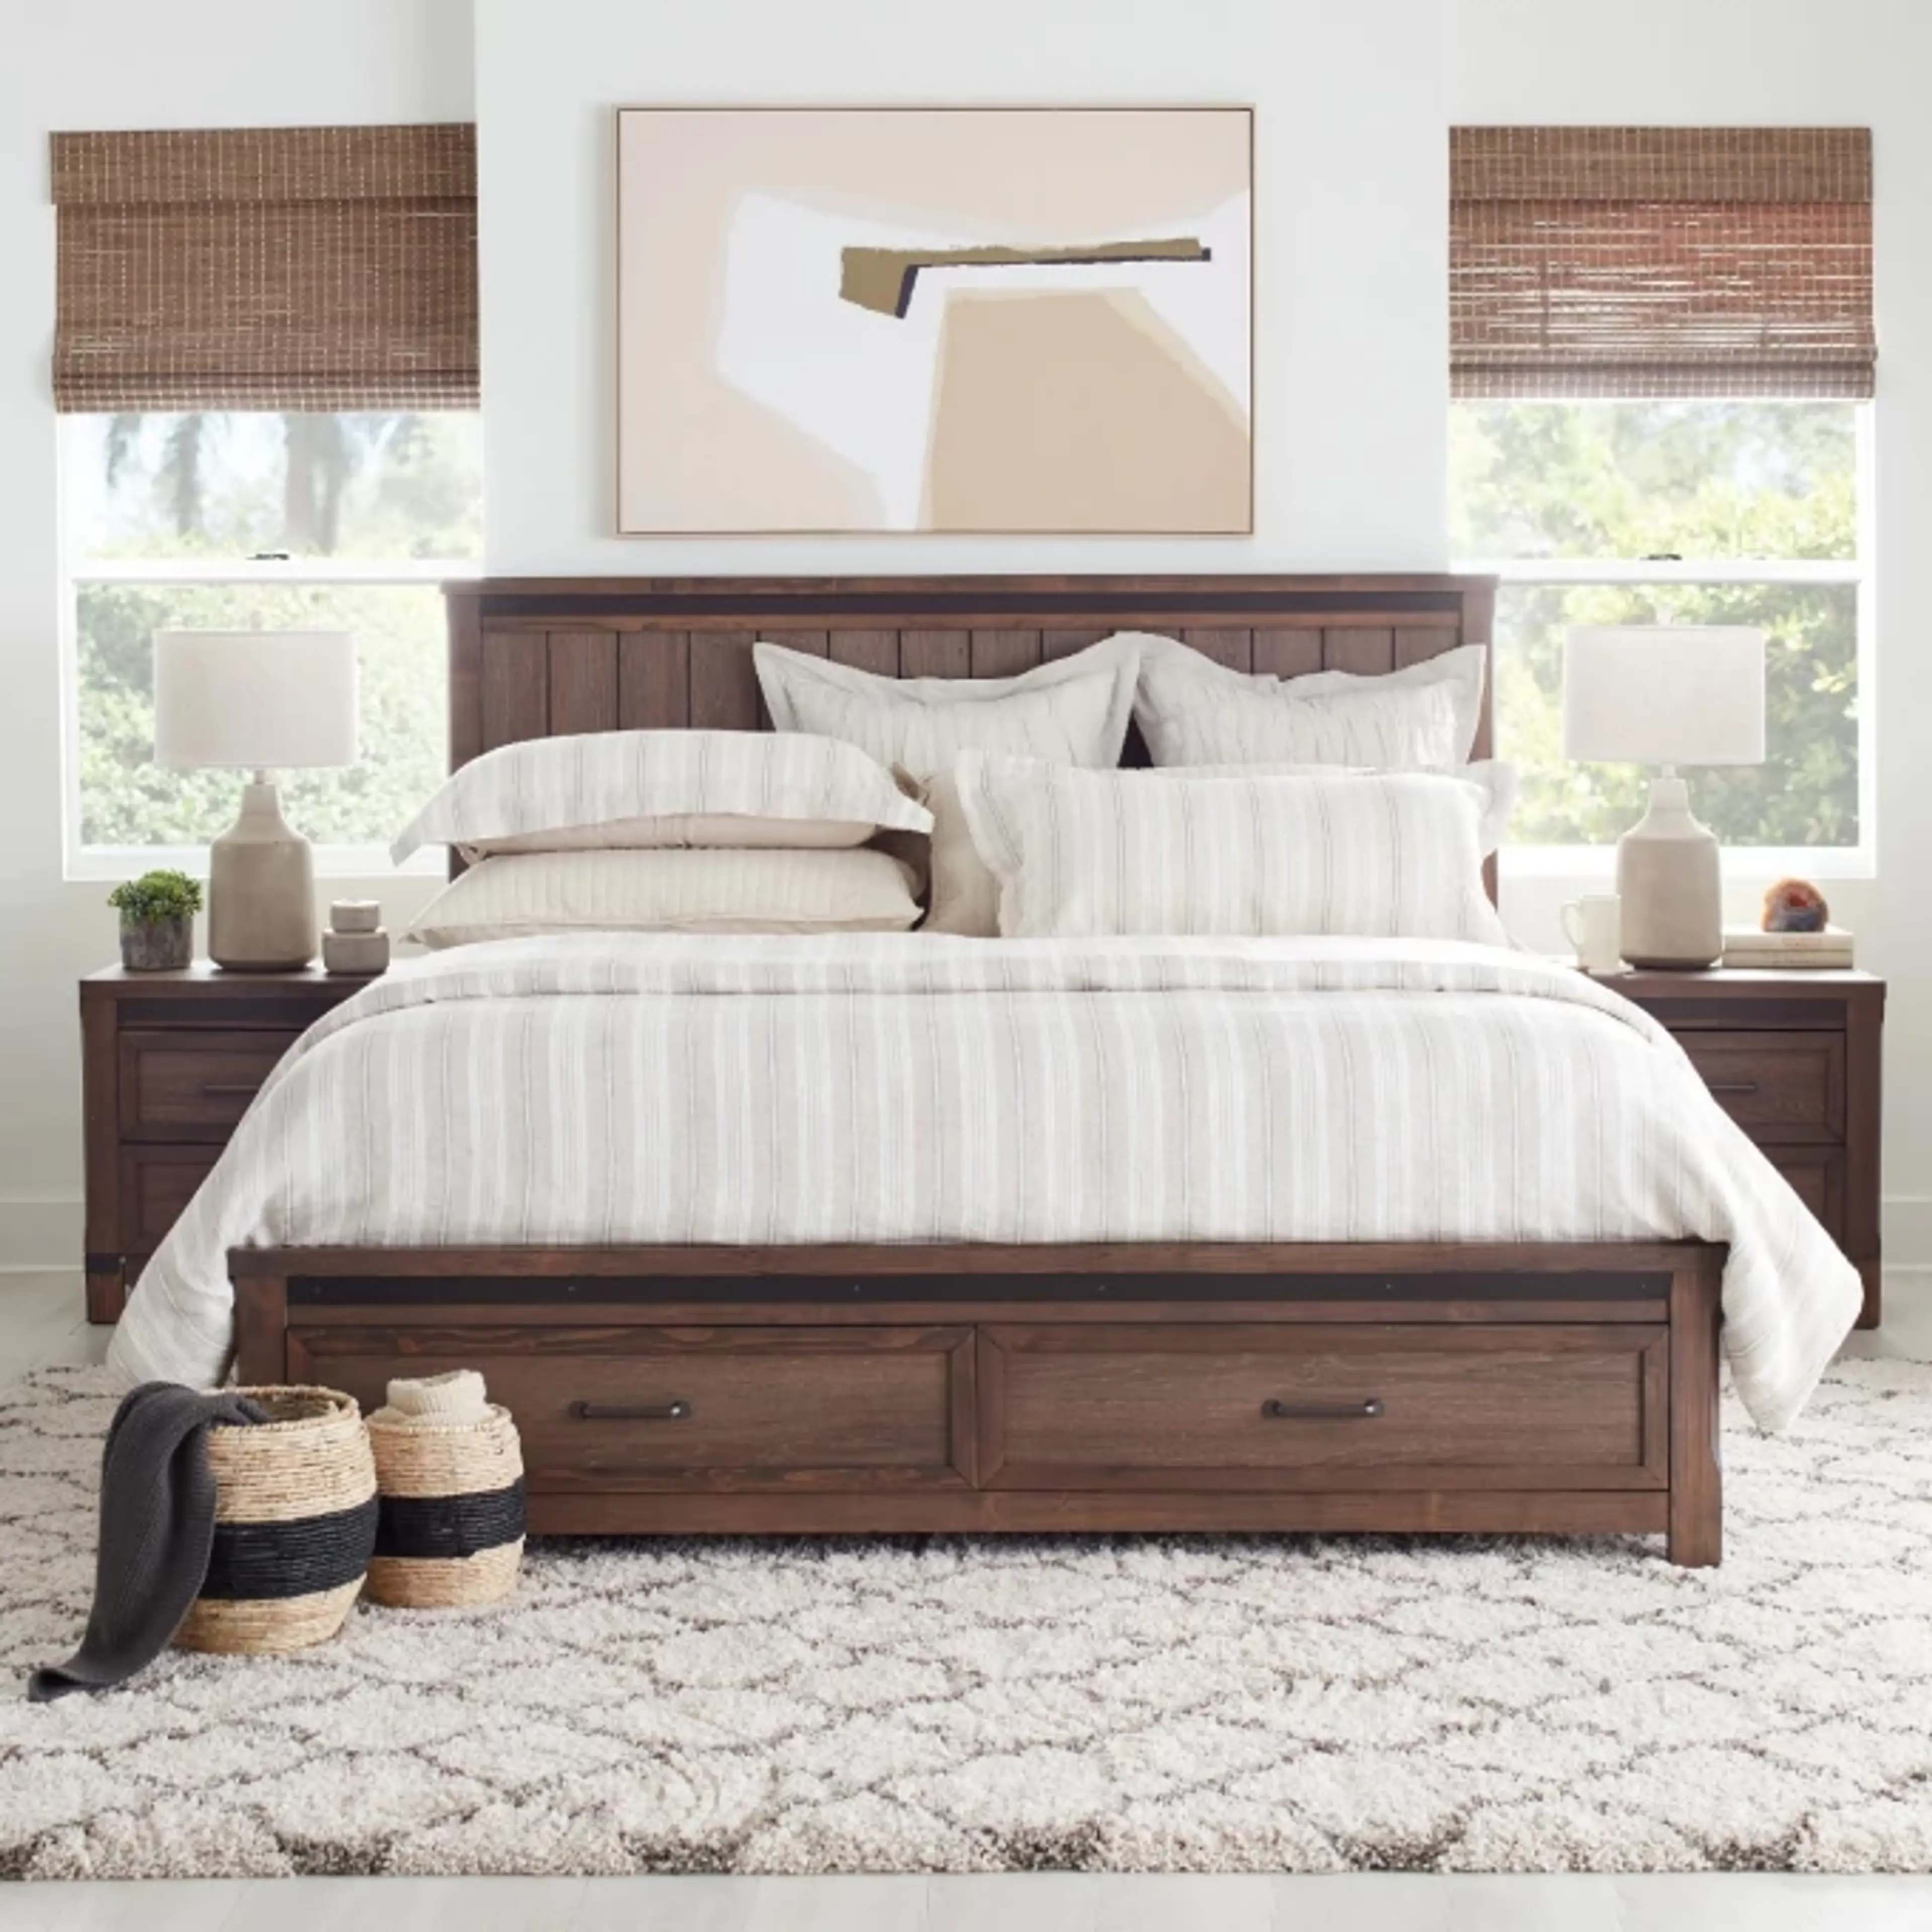 UP TO 20% OFF BEDROOM*